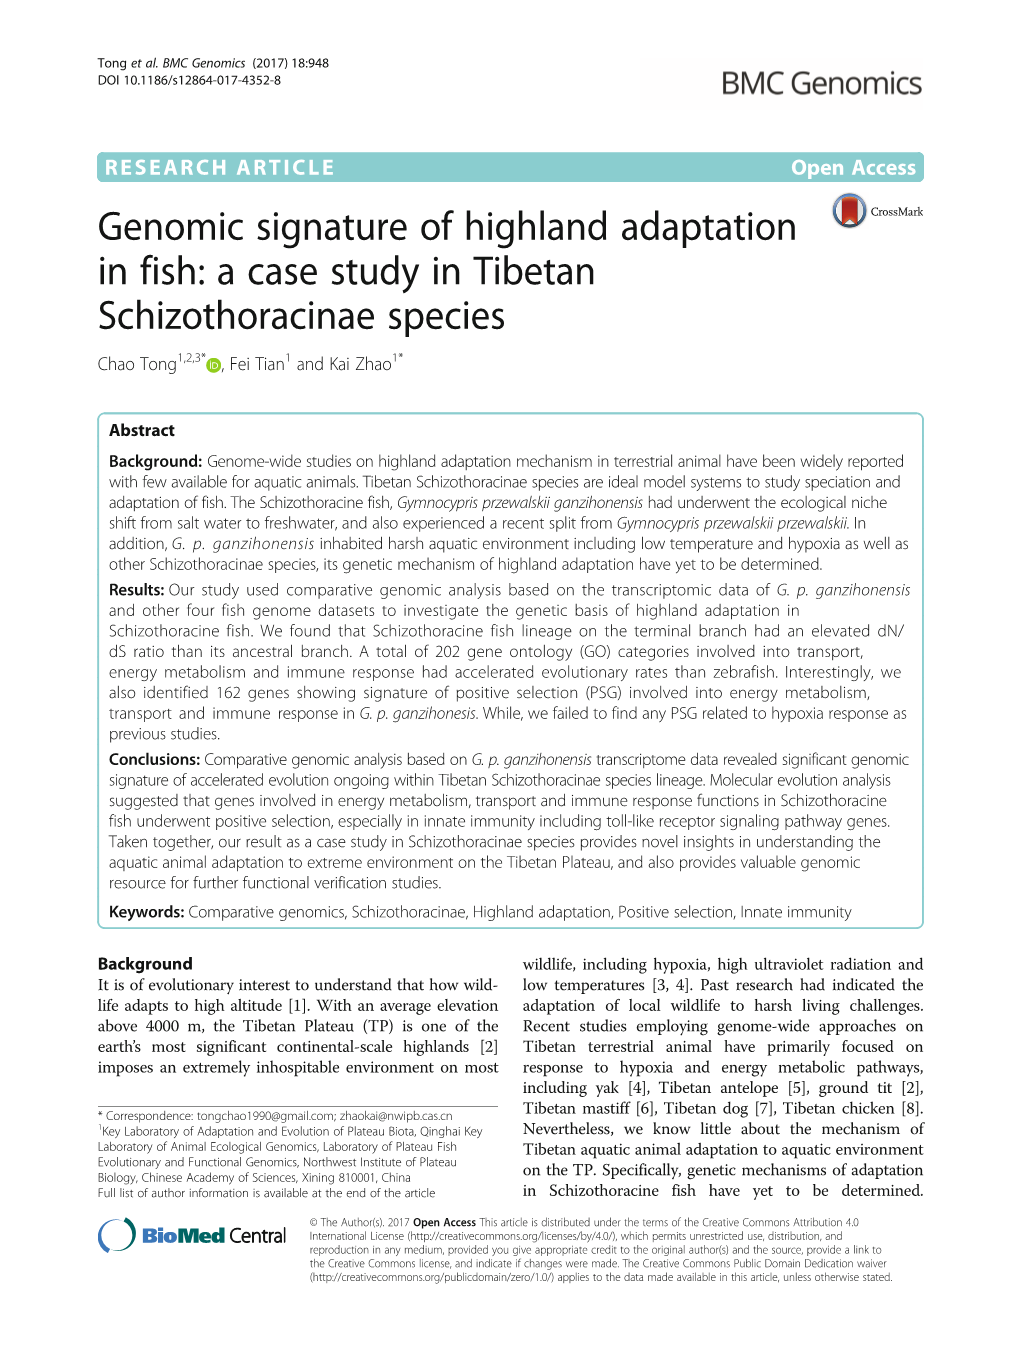 Genomic Signature of Highland Adaptation in Fish: a Case Study in Tibetan Schizothoracinae Species Chao Tong1,2,3* , Fei Tian1 and Kai Zhao1*